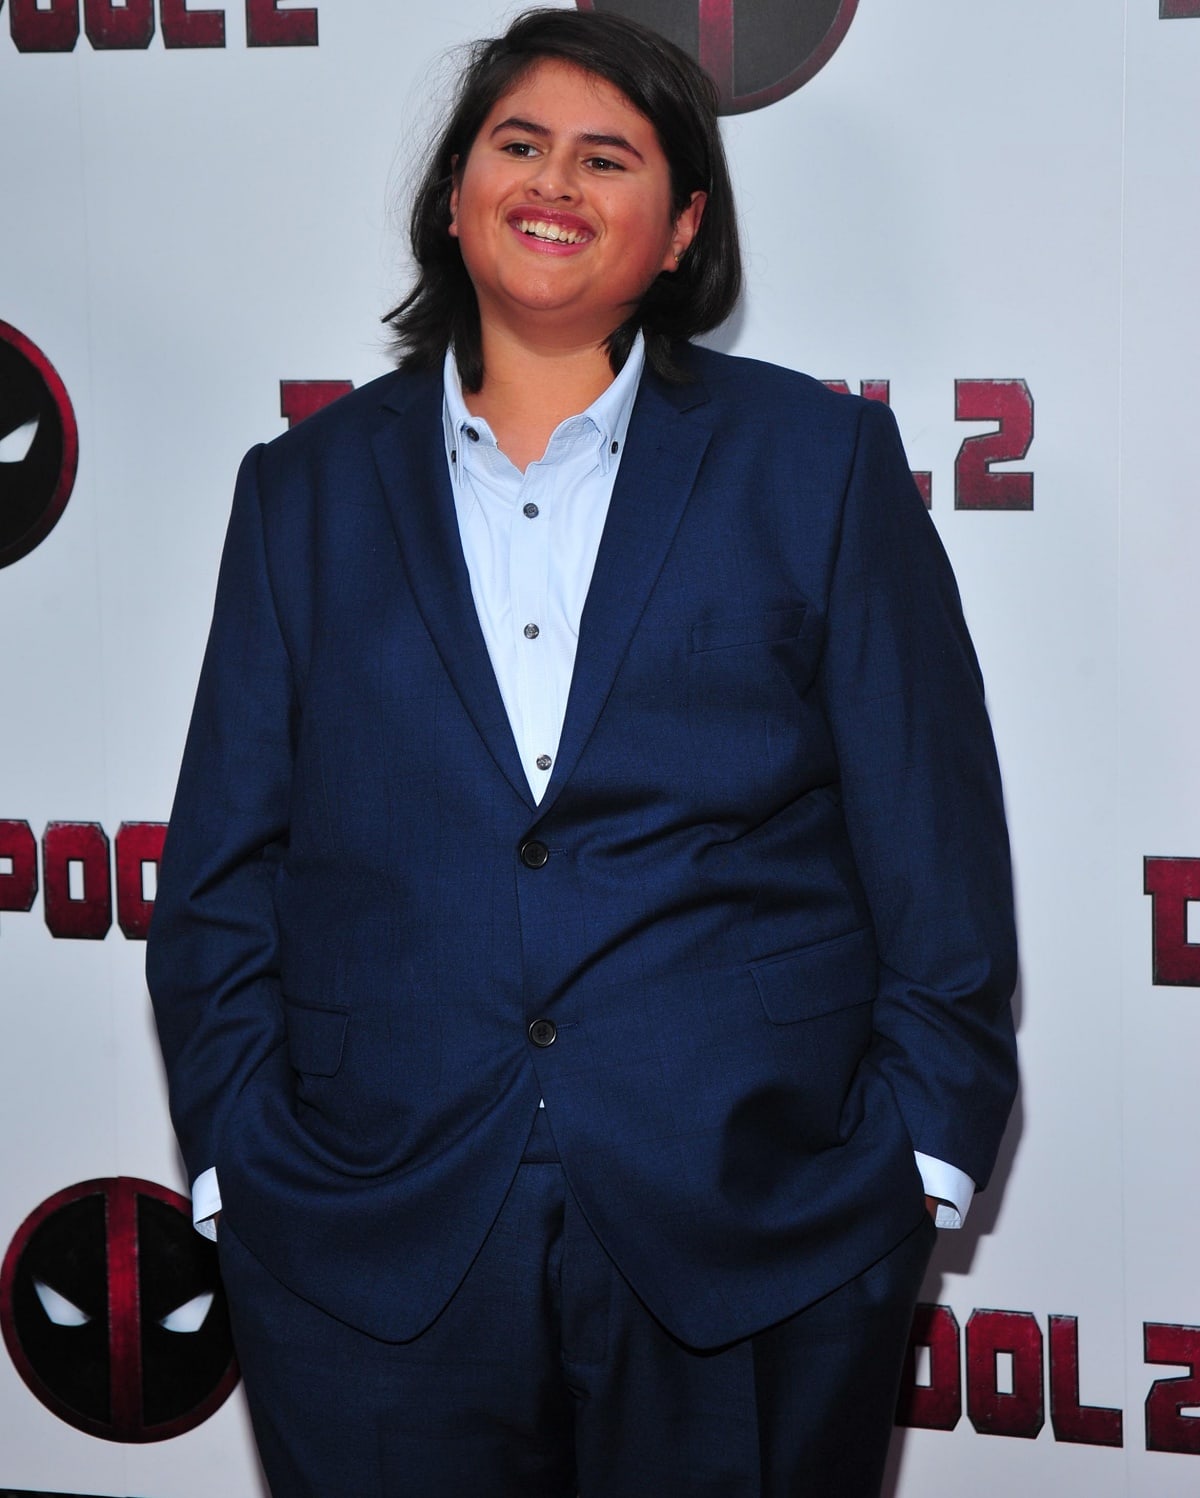 Julian Dennison, born on October 26, 2002, is a New Zealand actor who debuted in the 2013 film "Shopping," winning the English Film and Television Award for Best Supporting Actor, and is best known for his roles in "Hunt for the Wilderpeople" (2016), the highest-grossing New Zealand film in history, "Deadpool 2" (2018), "The Christmas Chronicles 2," and "Godzilla vs. Kong" (2021)